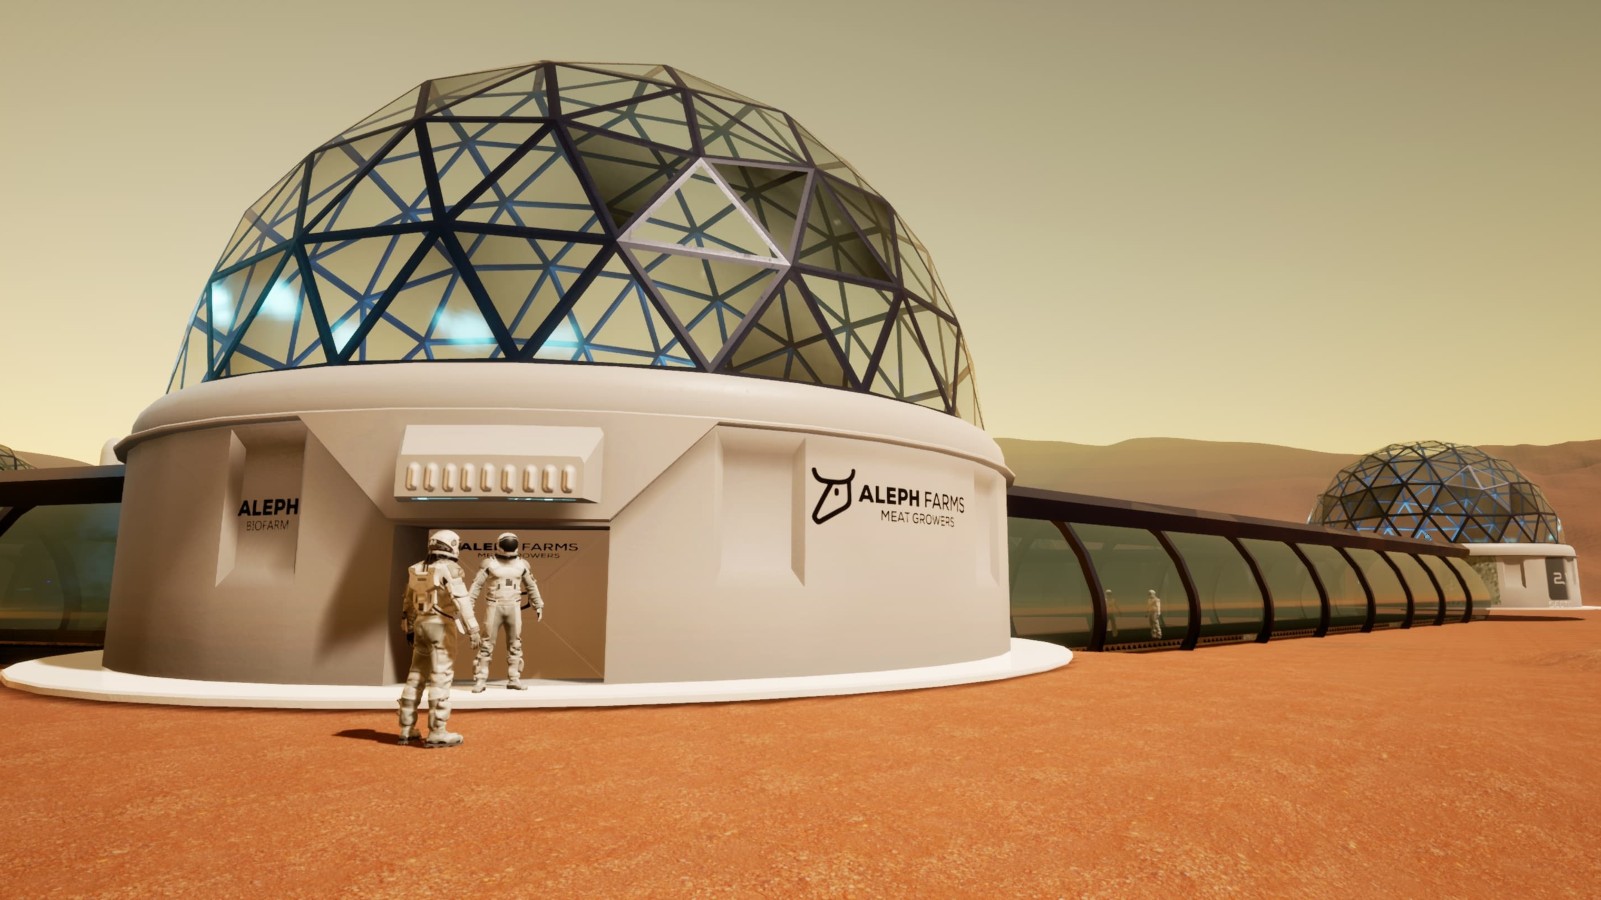 Illustration of an Aleph Farms BioFarm designed for cultivated meat production even in outer space. Photo: courtesy